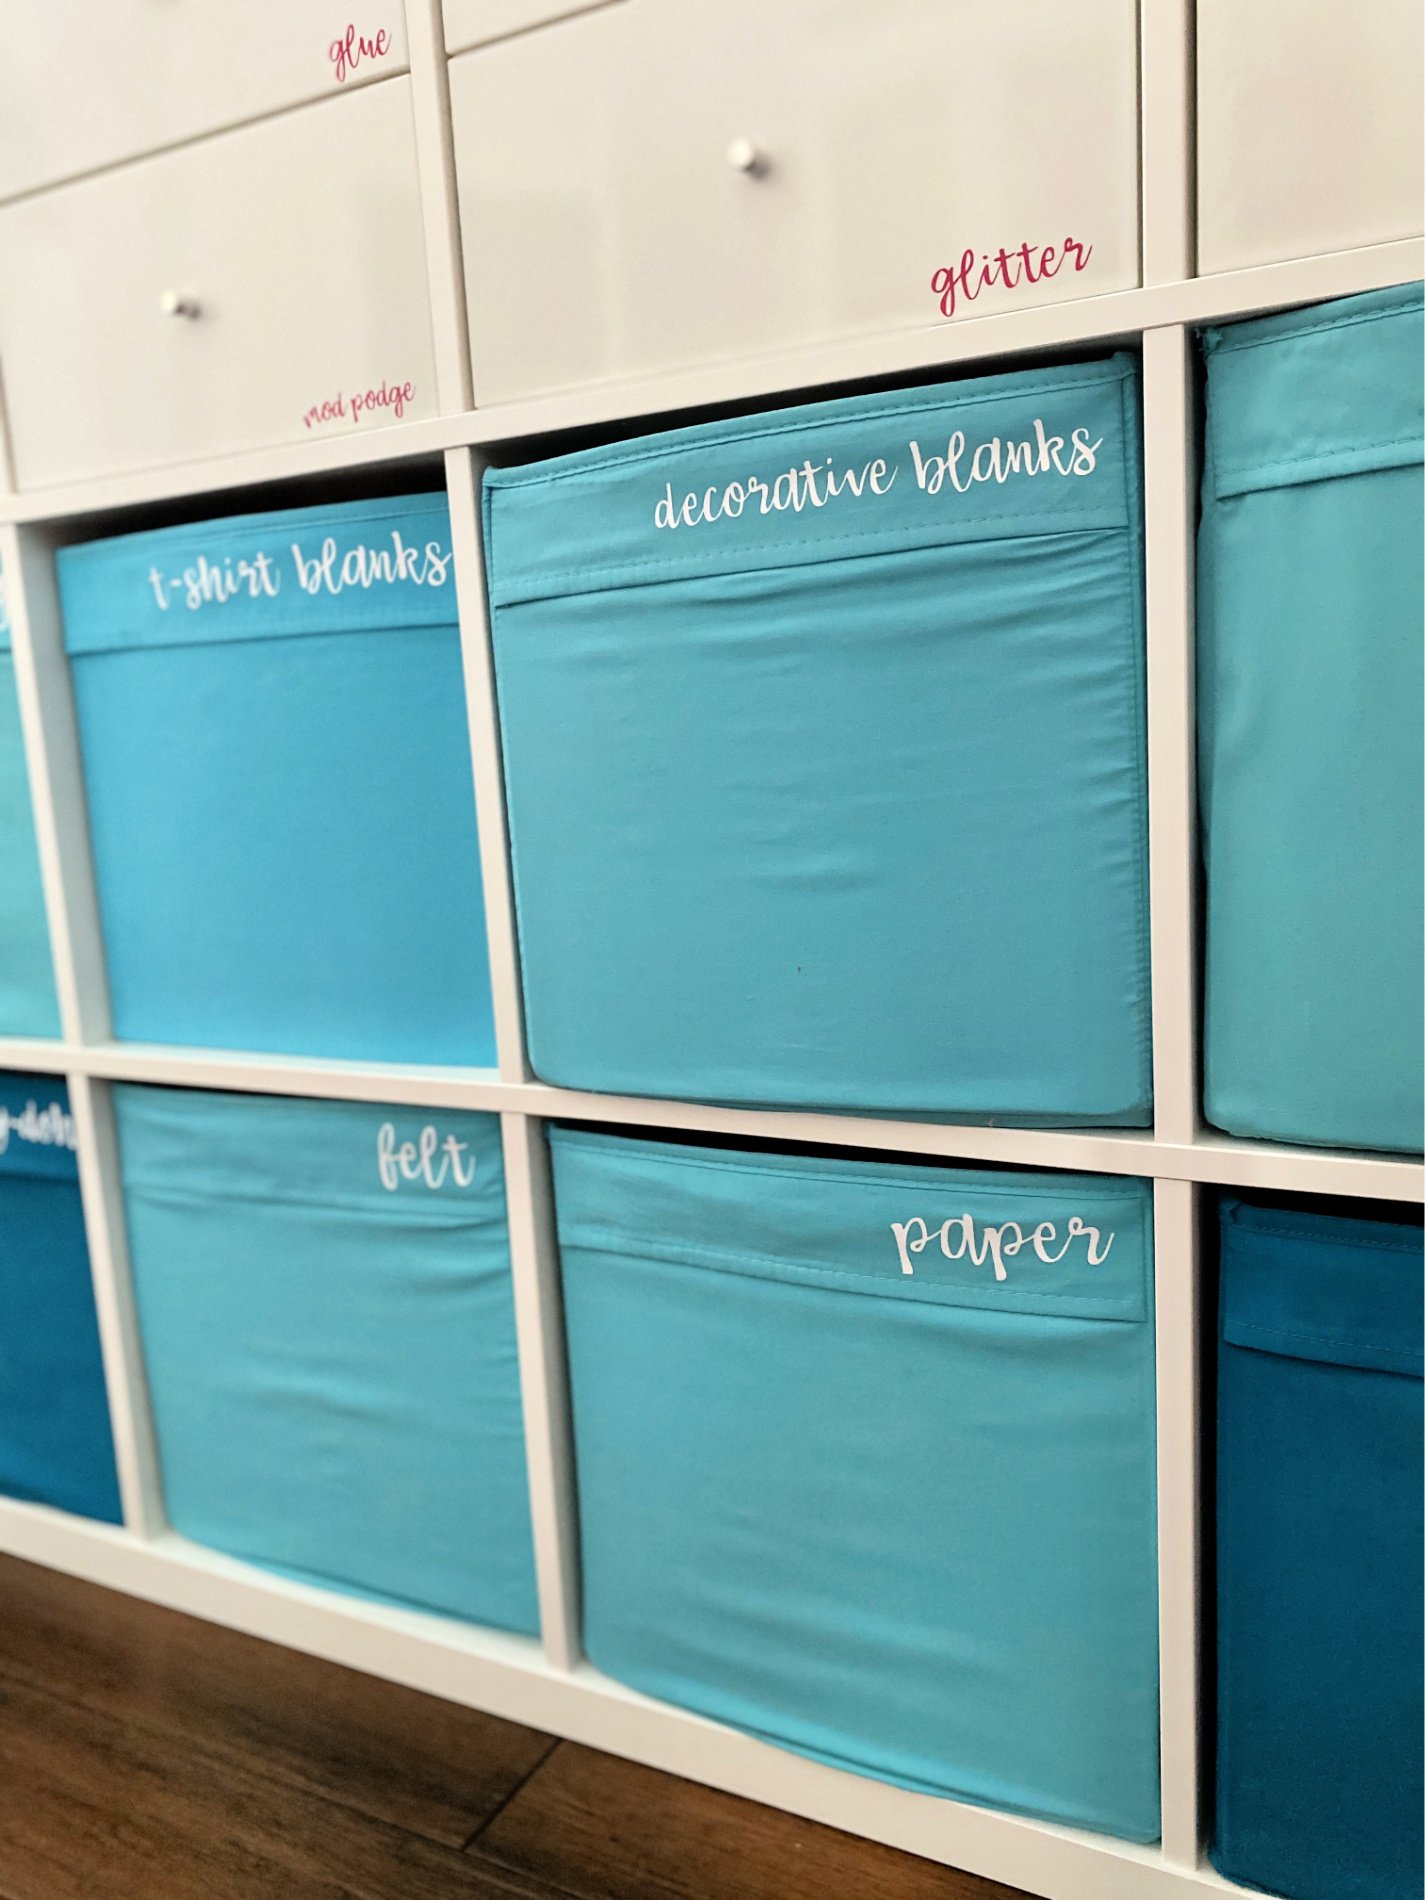 White cube shelve holding blue cloth bins with text on bins.